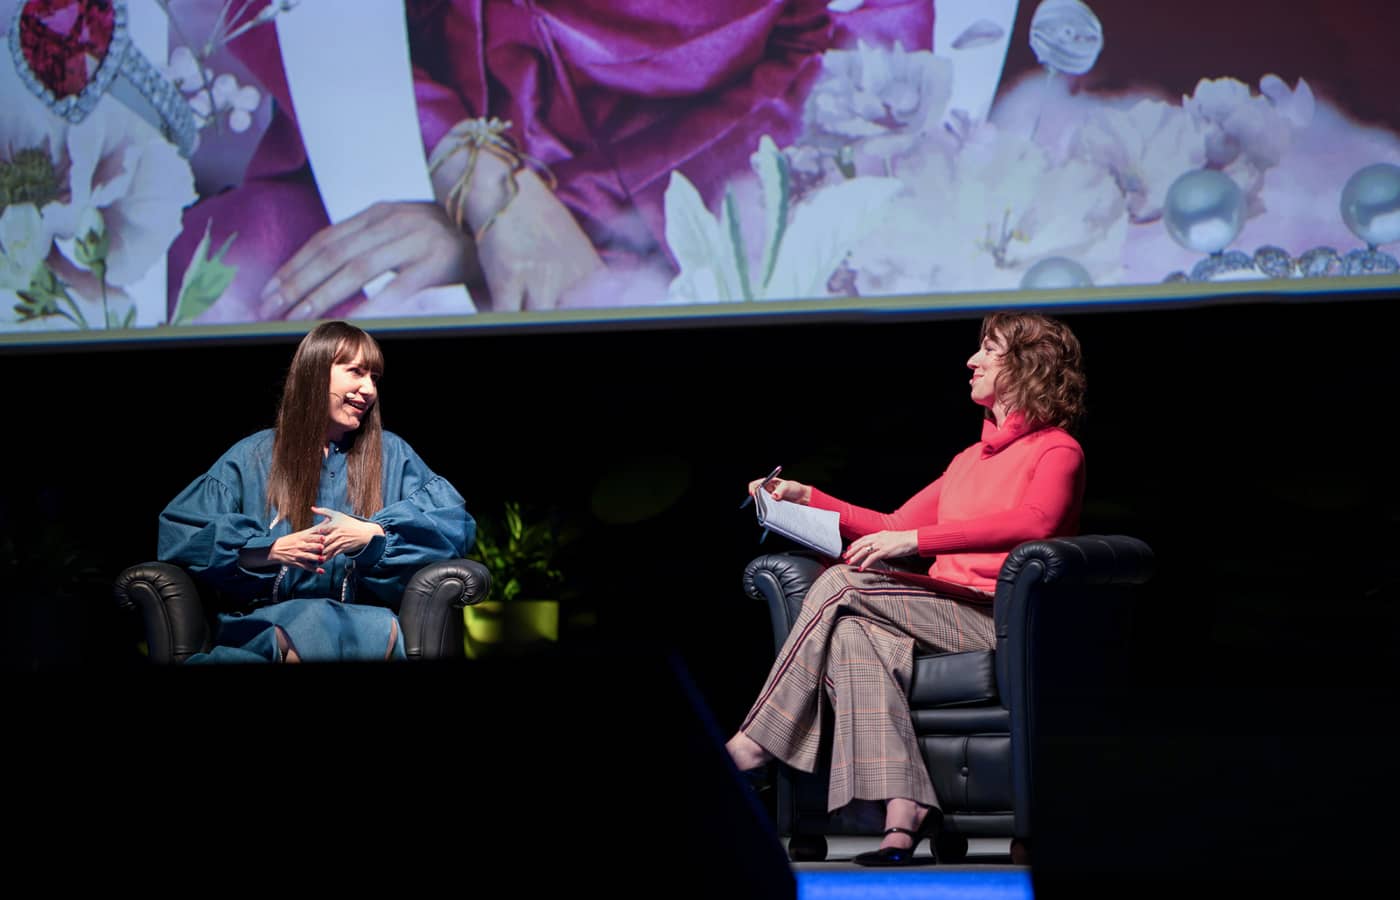 Katerina Perez speaks at Vicenzaoro with Elle Hill, founder and CEO of Hill & Co.